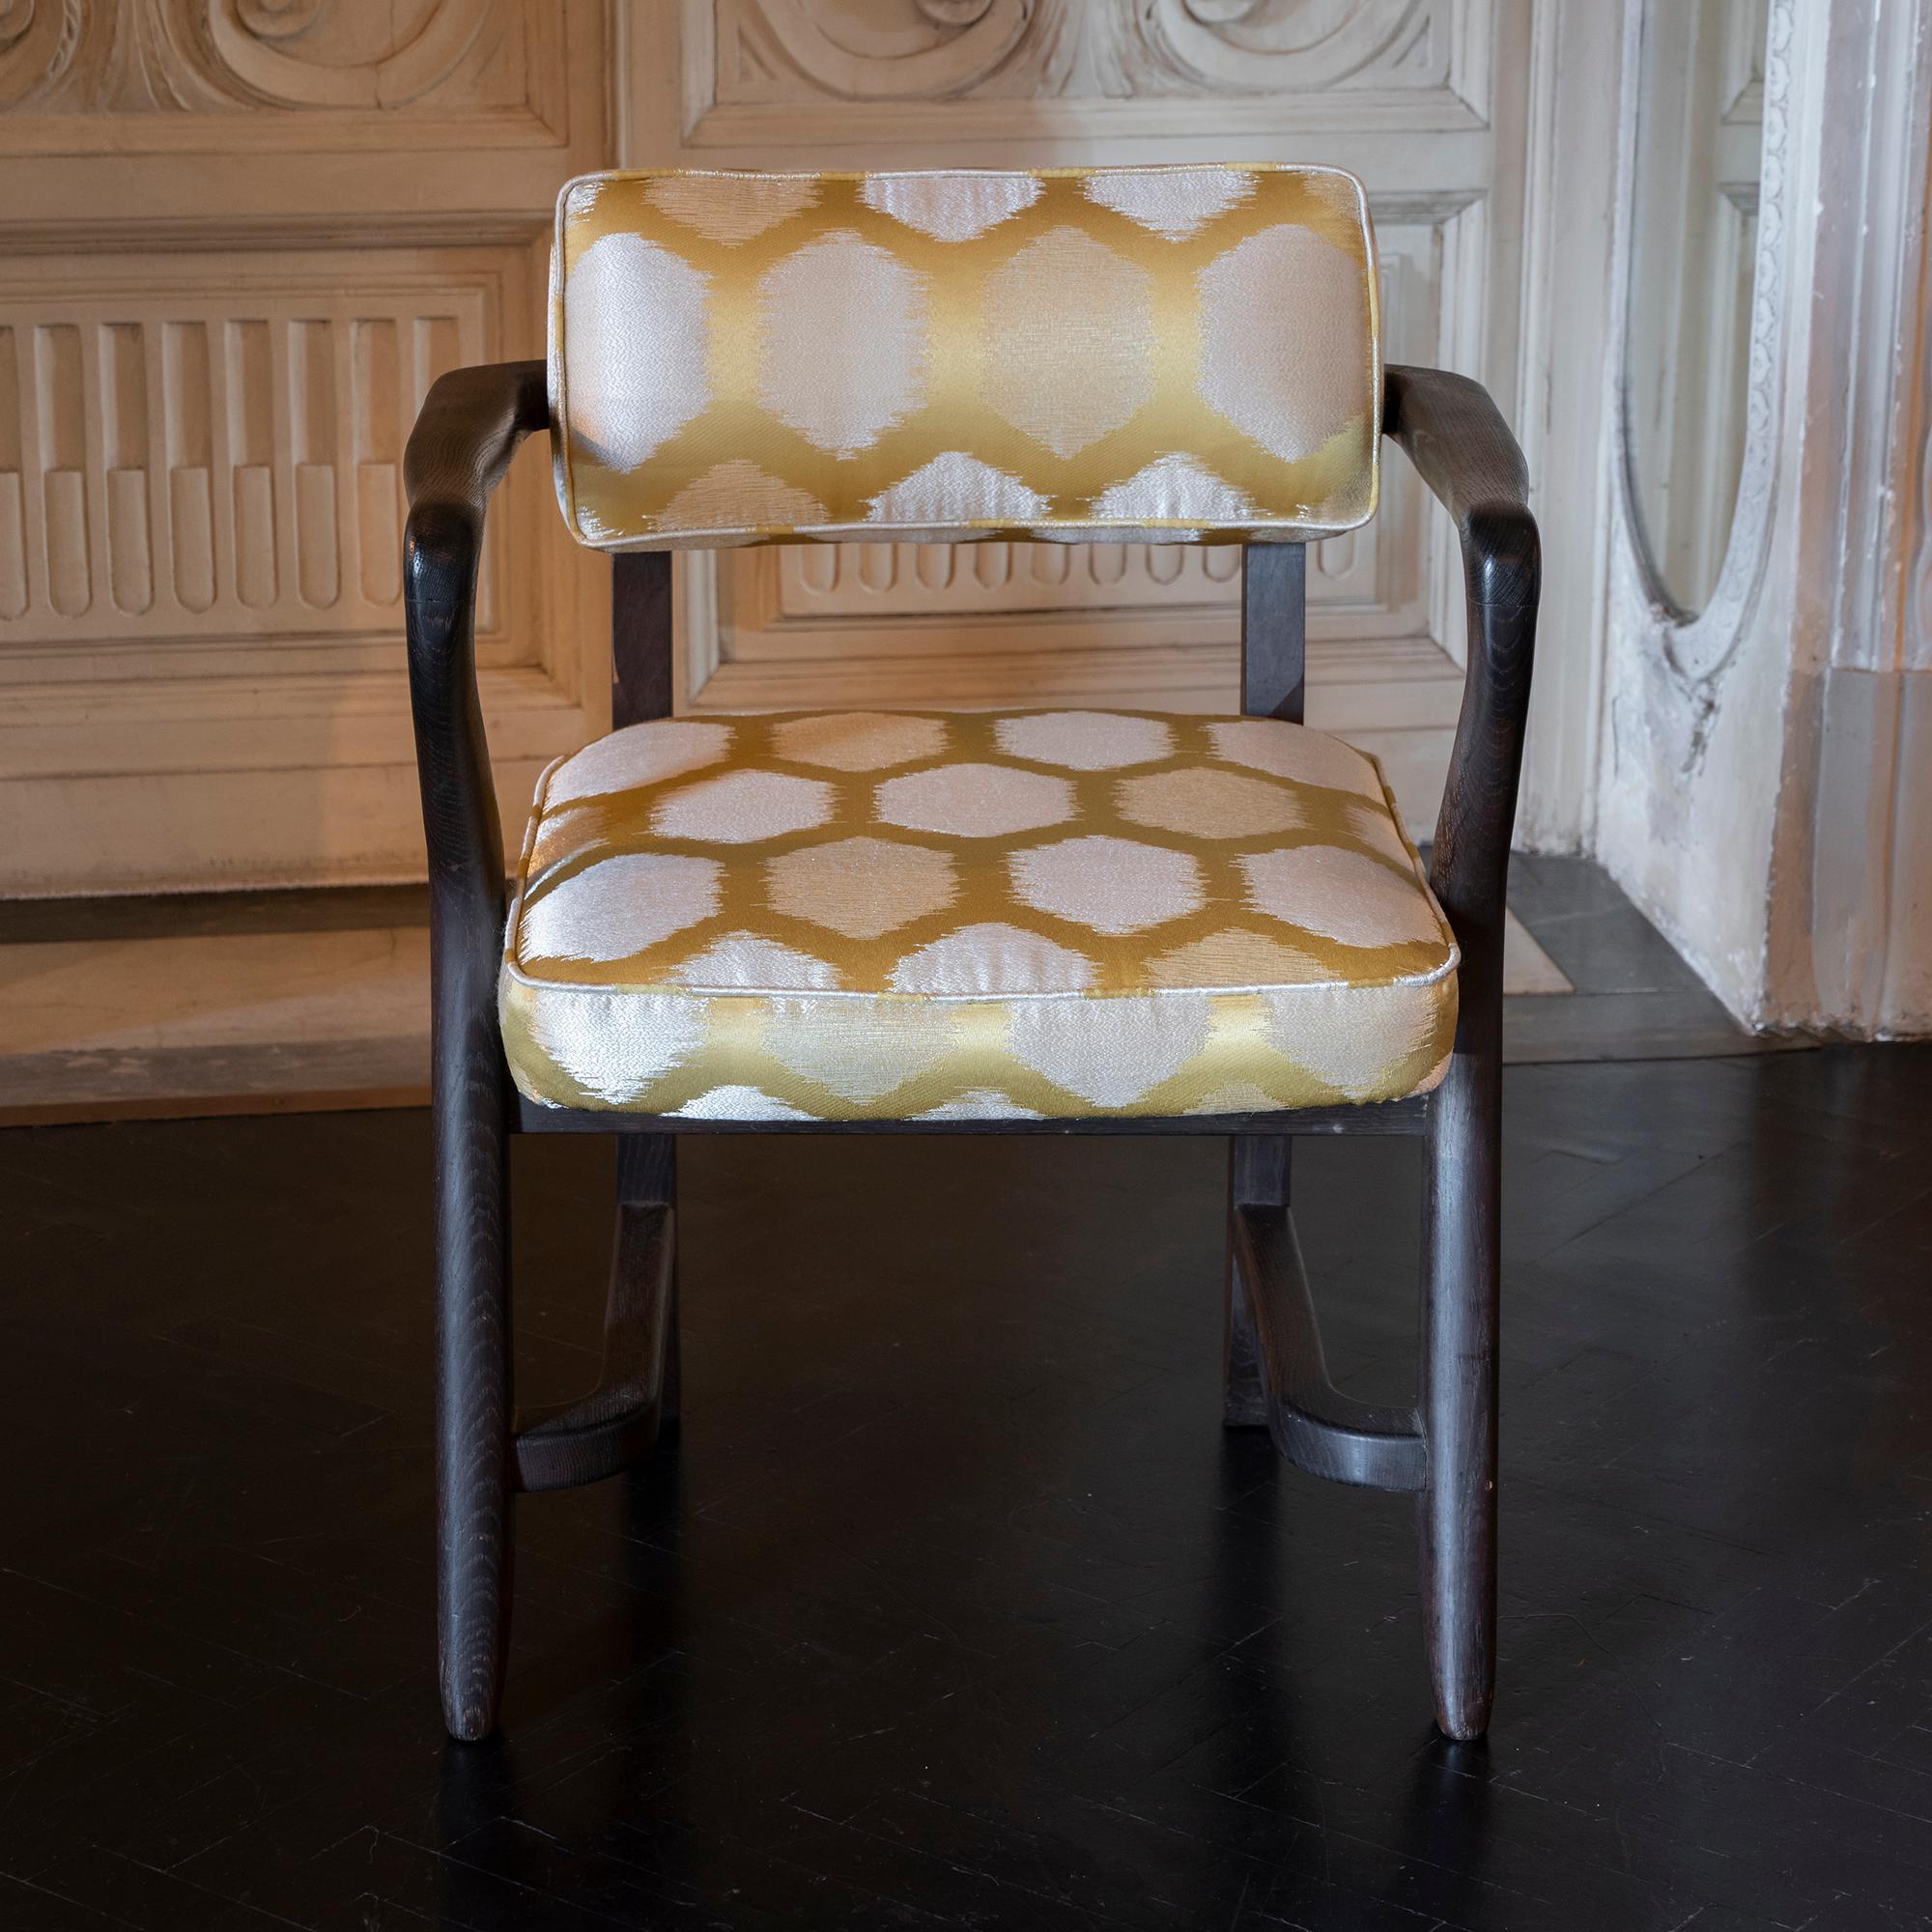 Pair of bridge armchairs designed by Guillerme and Chambron, solid oak structure and newly reupholstered cushions in beige or yellow Jacquard silk fabric, France, 1950s.